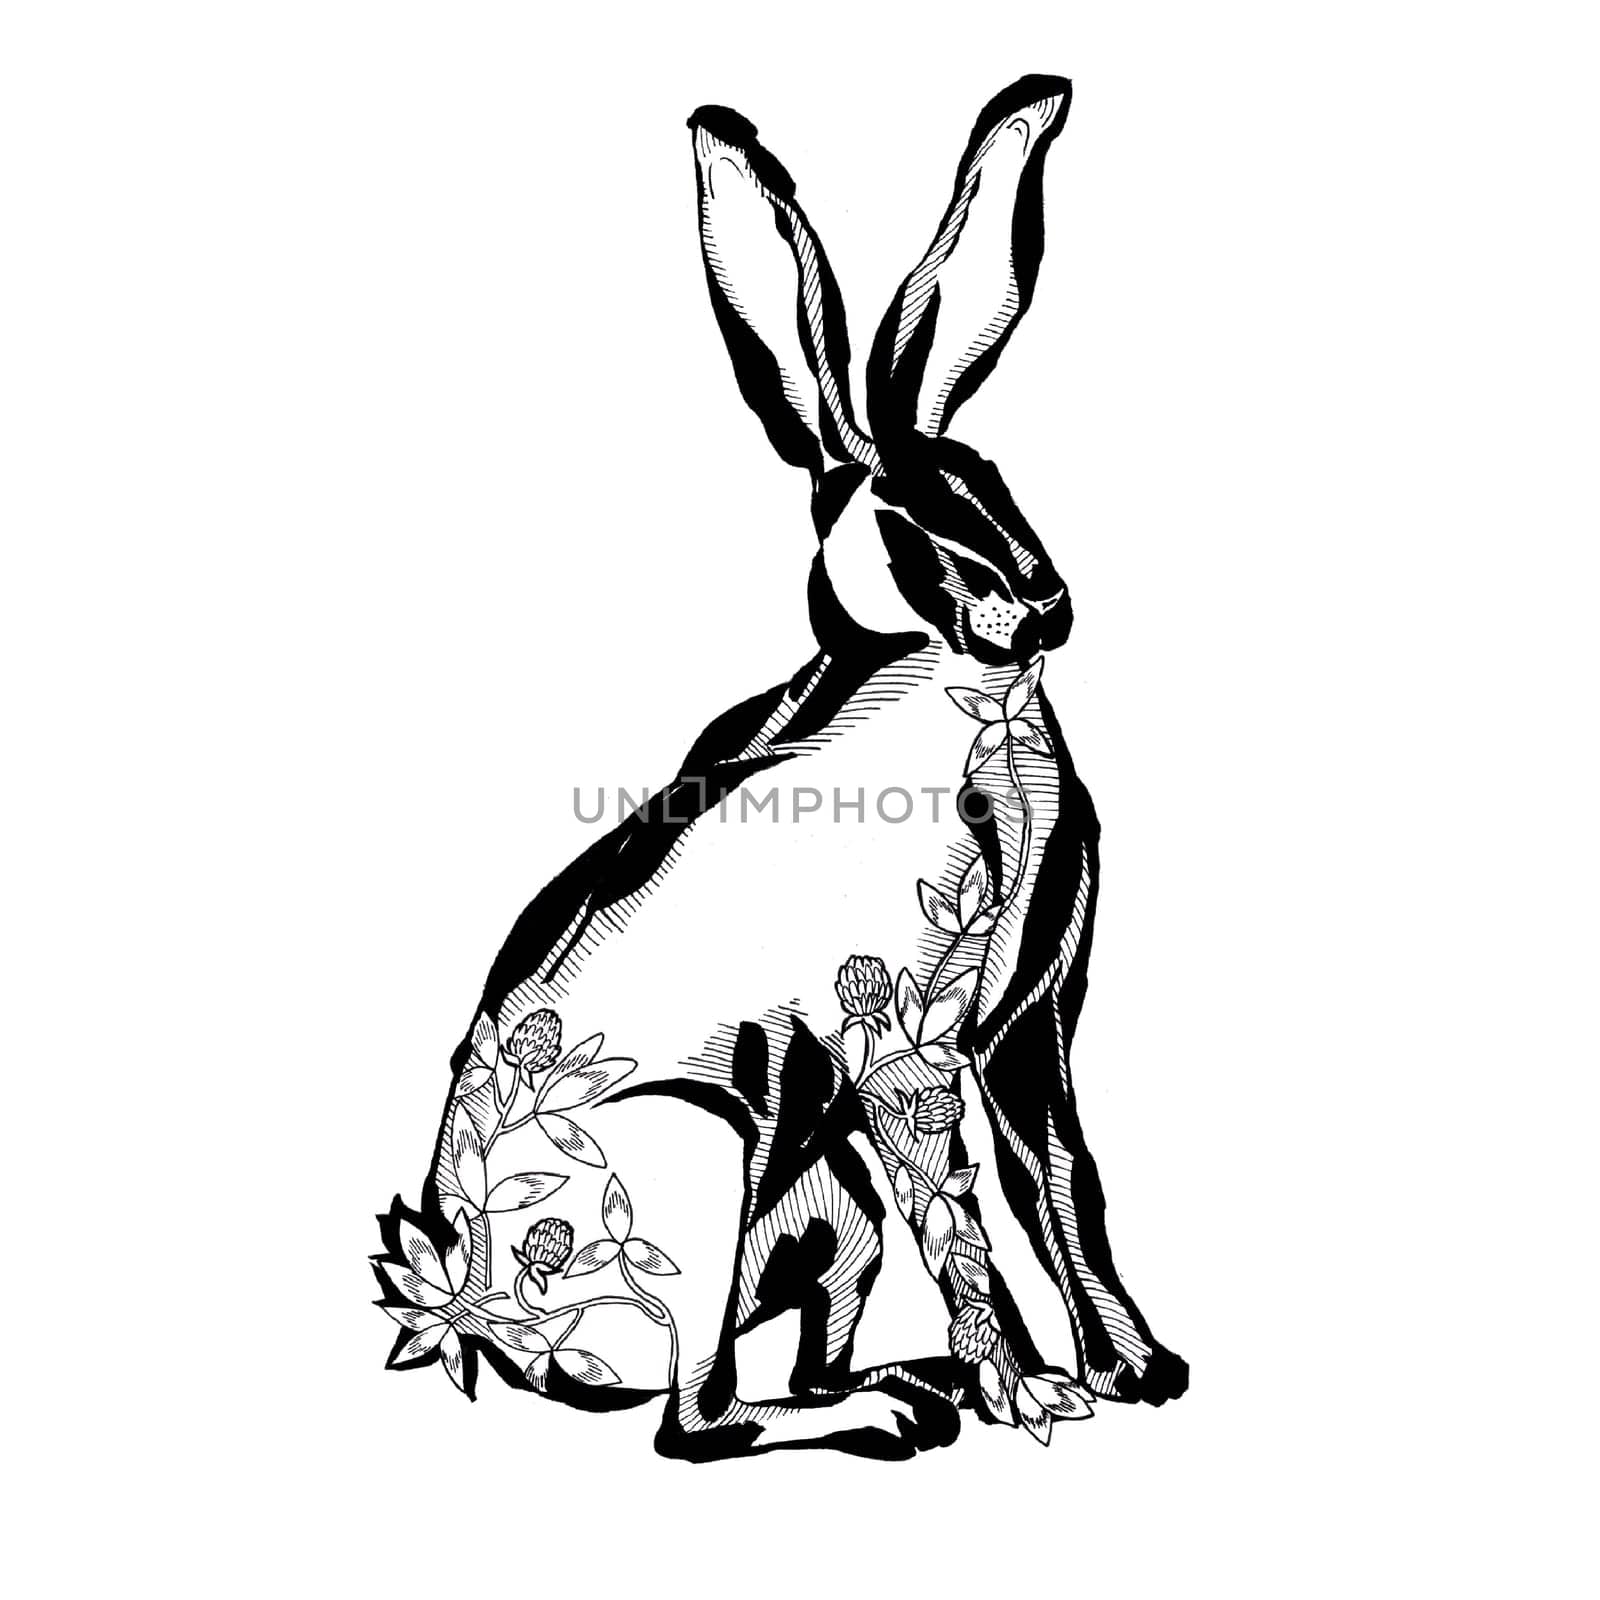 Wild hare or brown rabbit. European Bunny or cowardly coney. Hand drawn engraved old animal sketch for T-shirt, tattoo or label or poster.